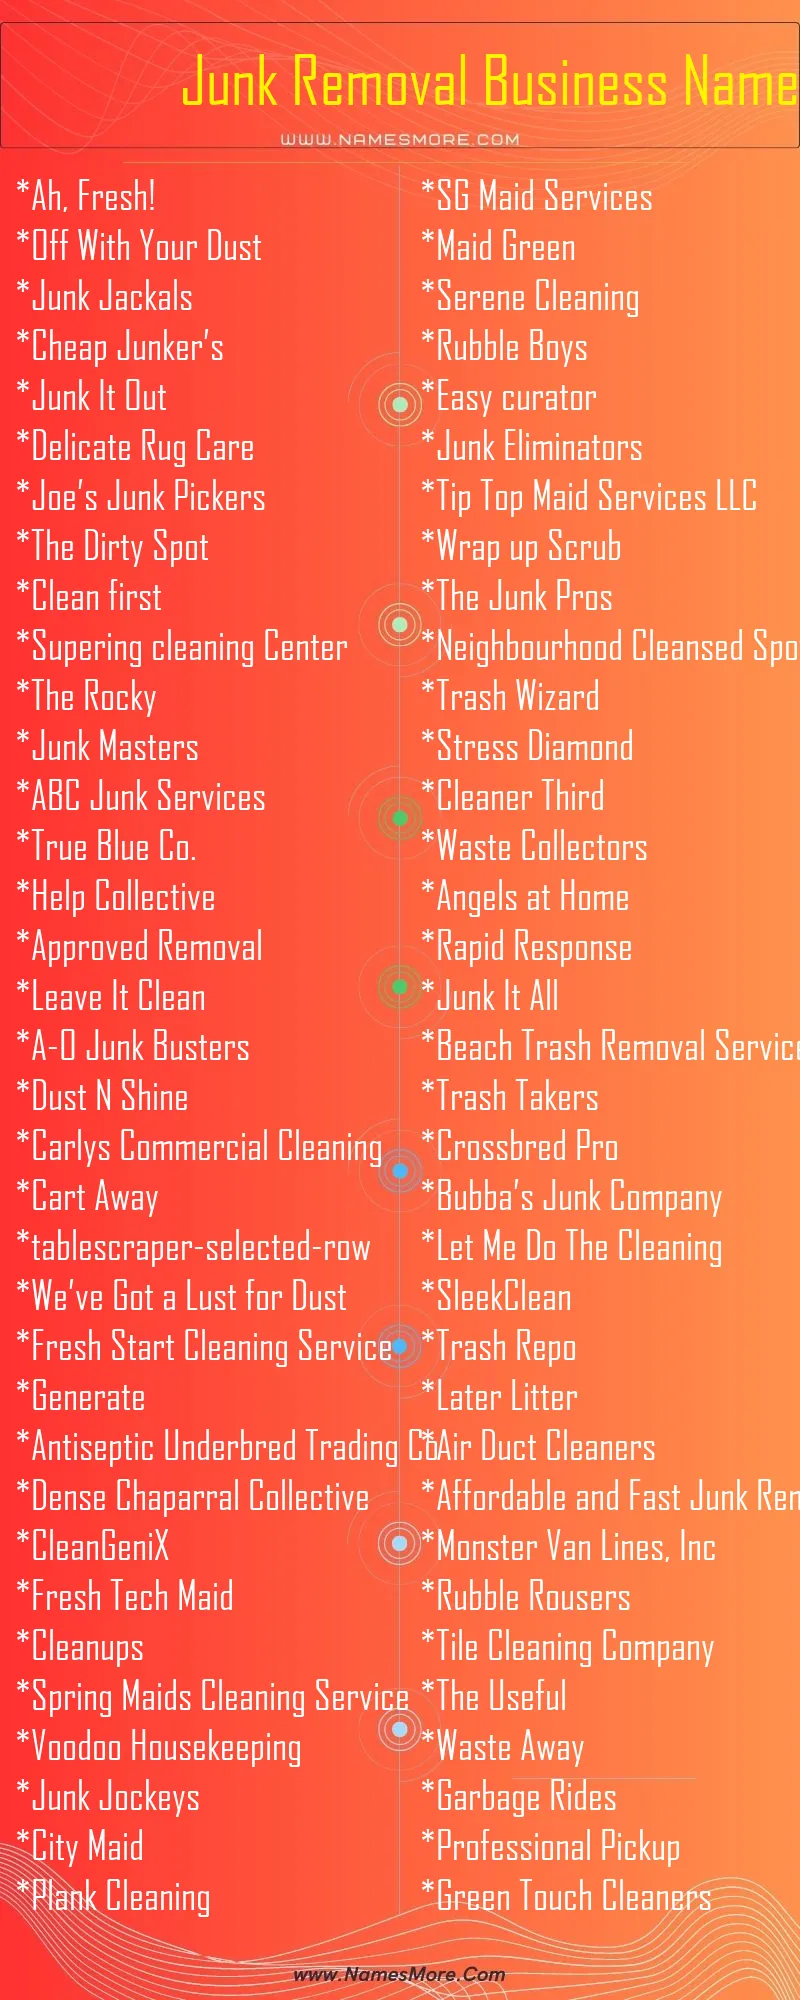 Junk Removal Business Names List Infographic